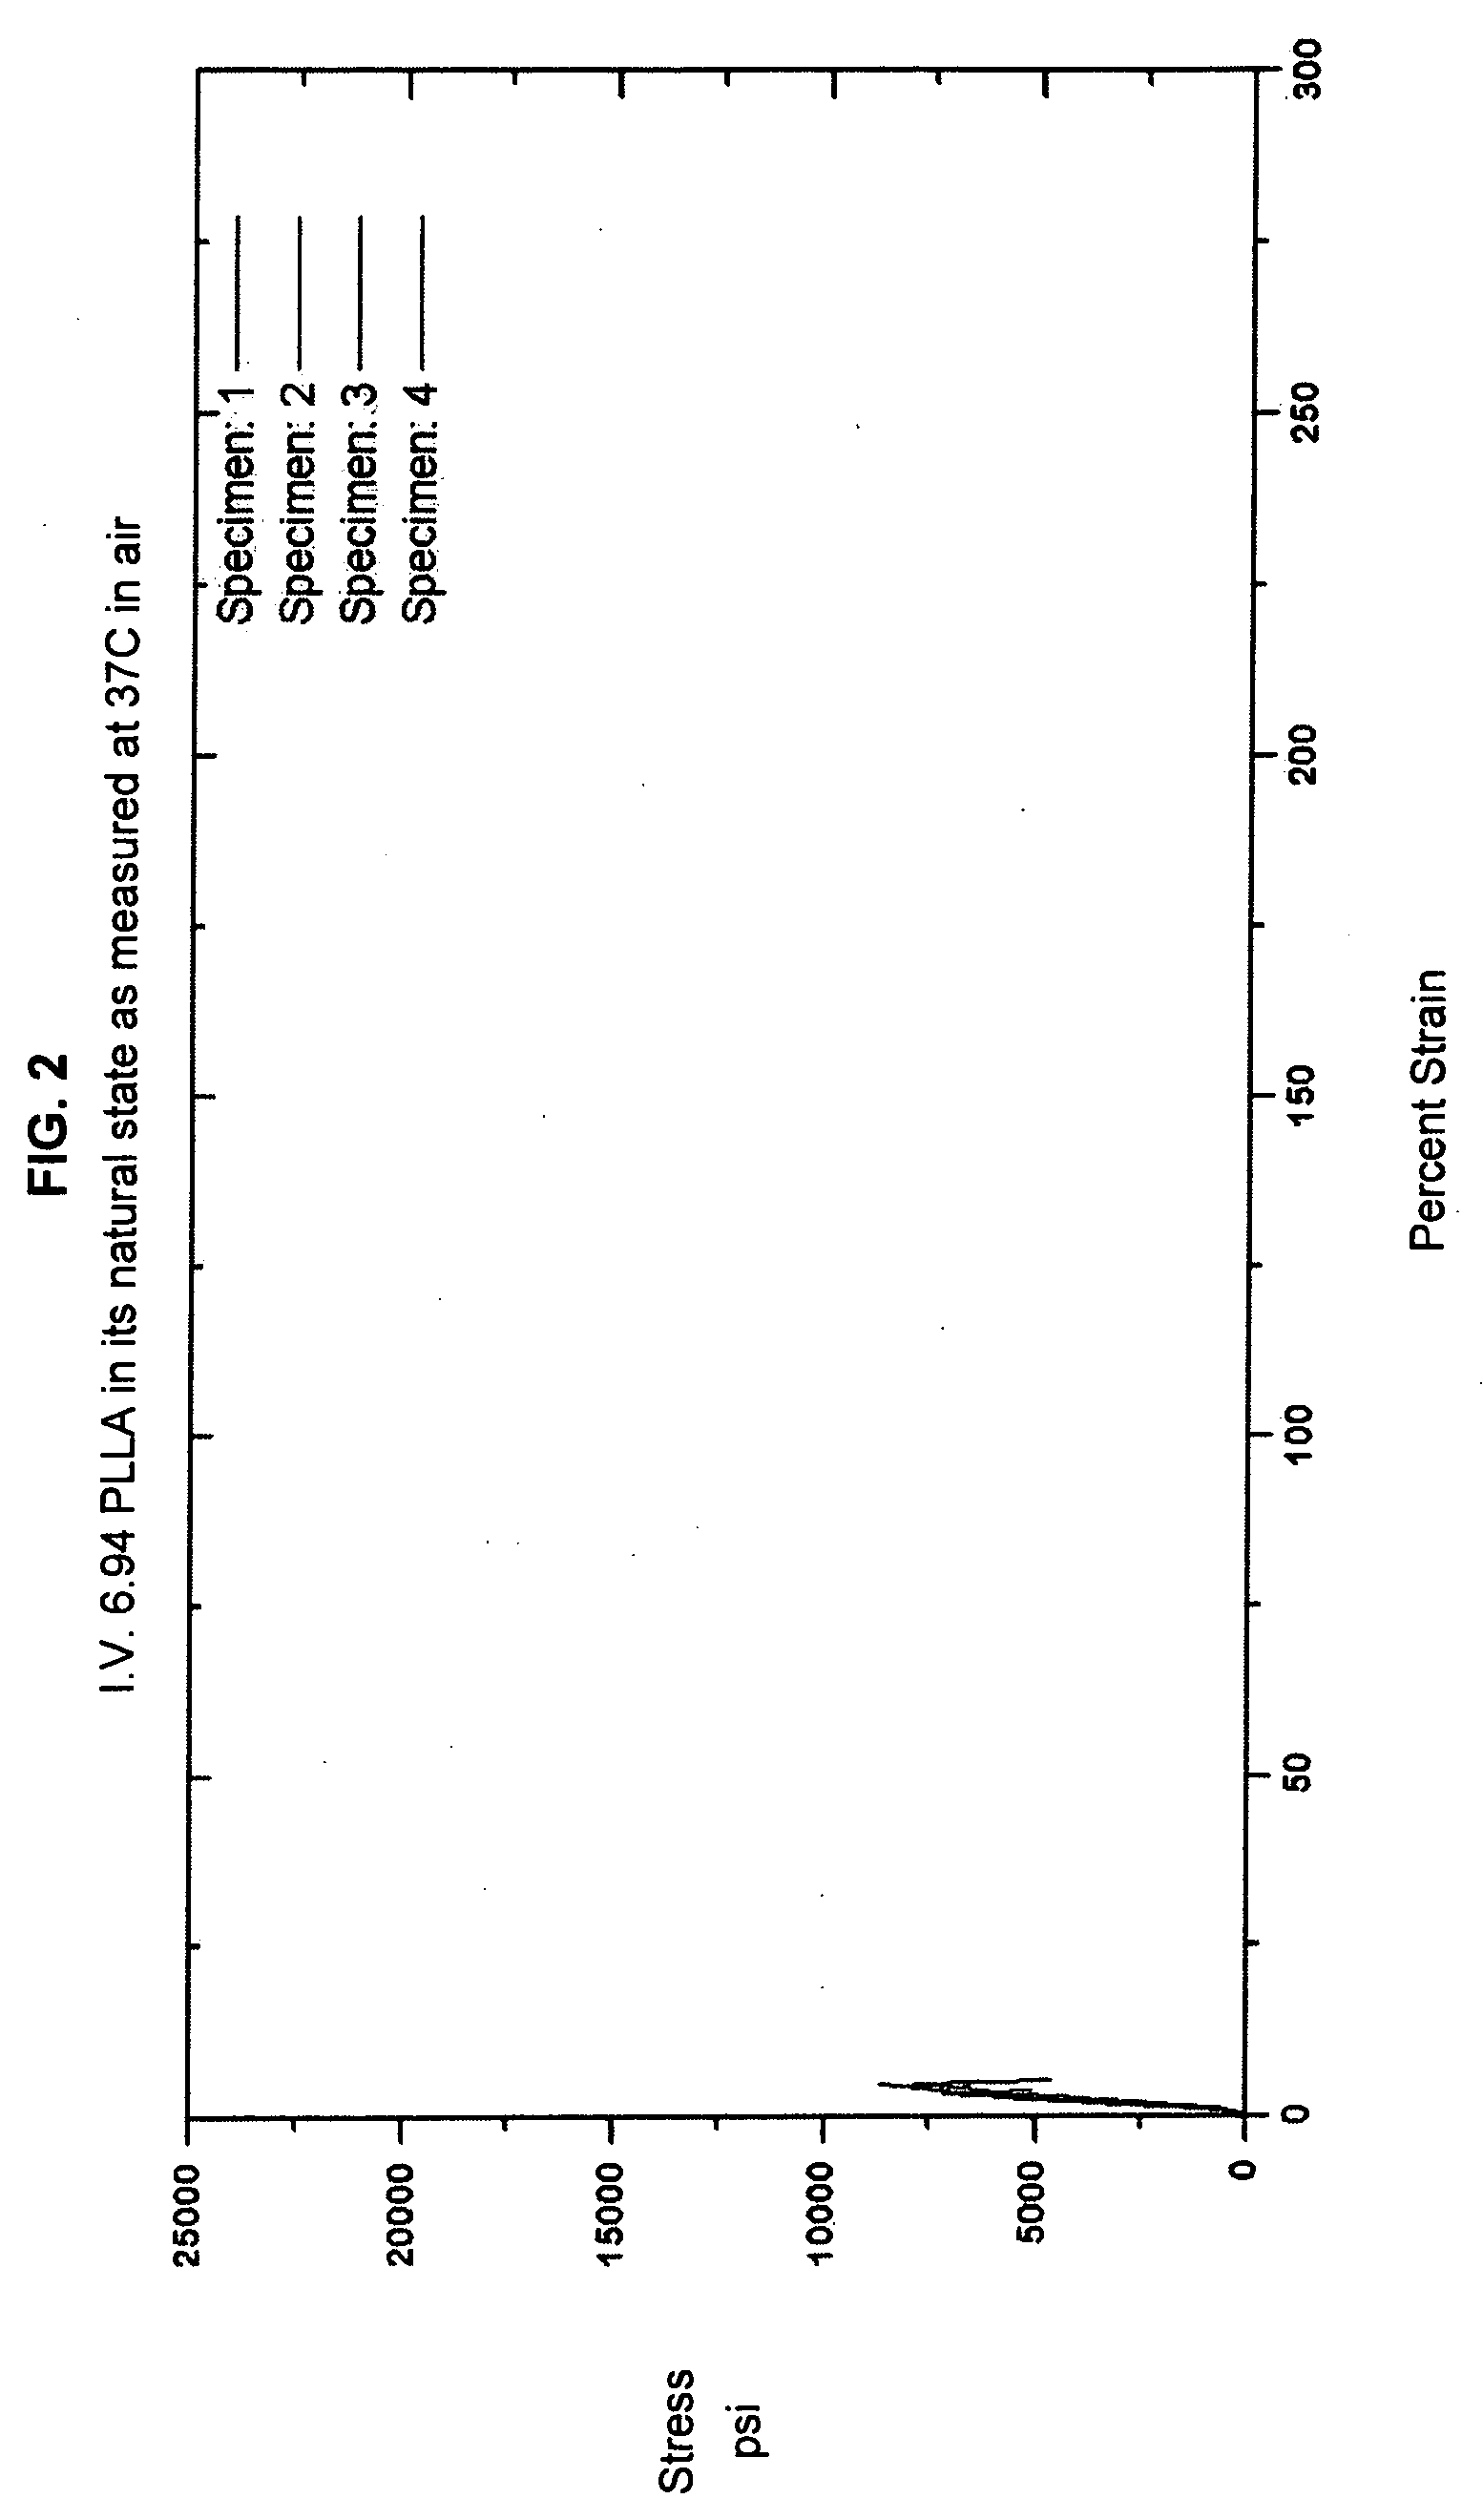 Polymeric endoprostheses with enhanced strength and flexibility and methods of manufacture